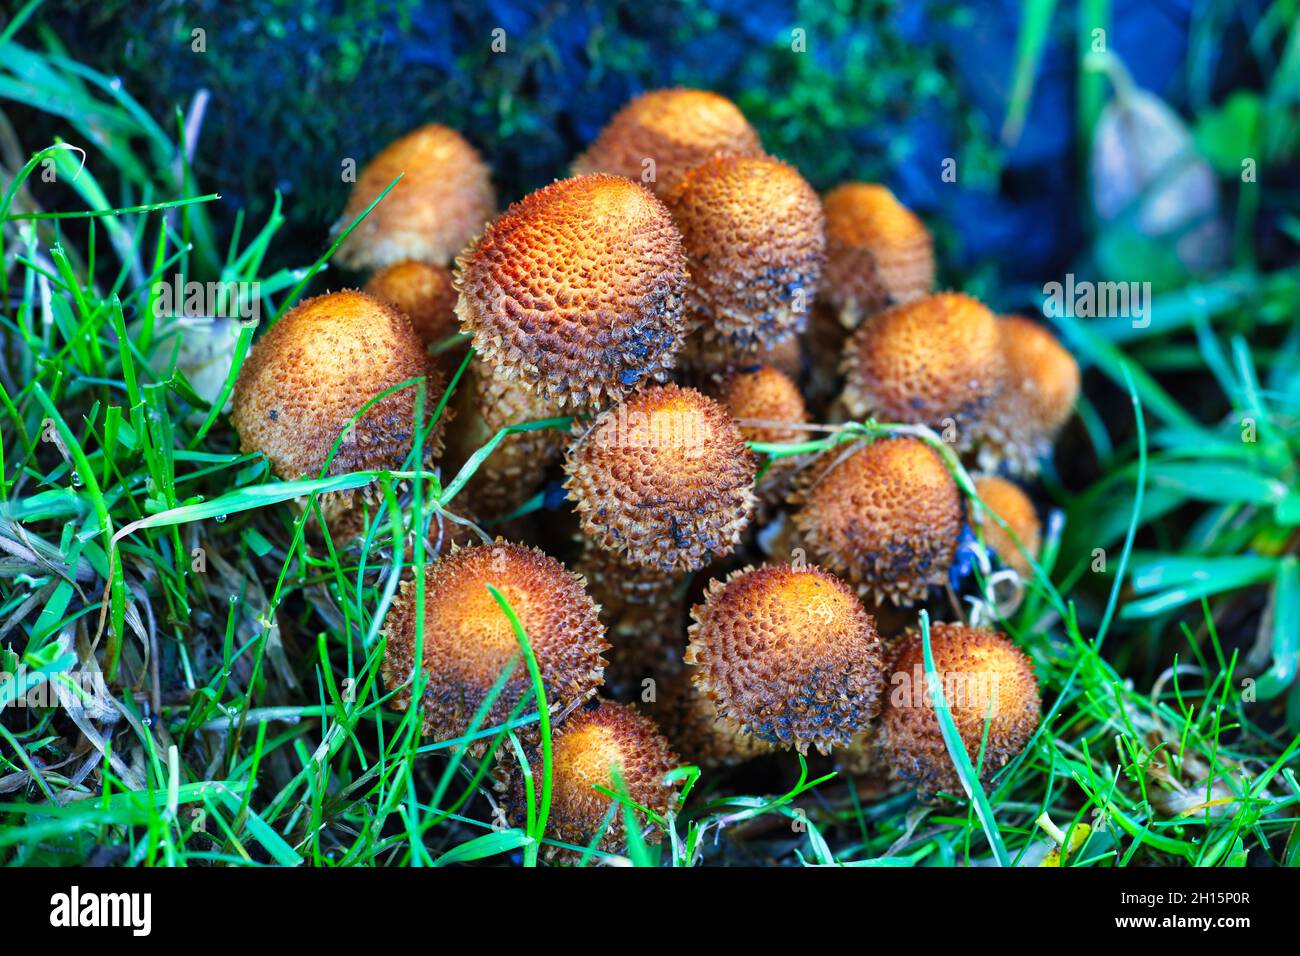 A Cluster of Inocybaceae Fungi growing under a Tree in the Yorkshire Dales National Park, England, UK. Stock Photo